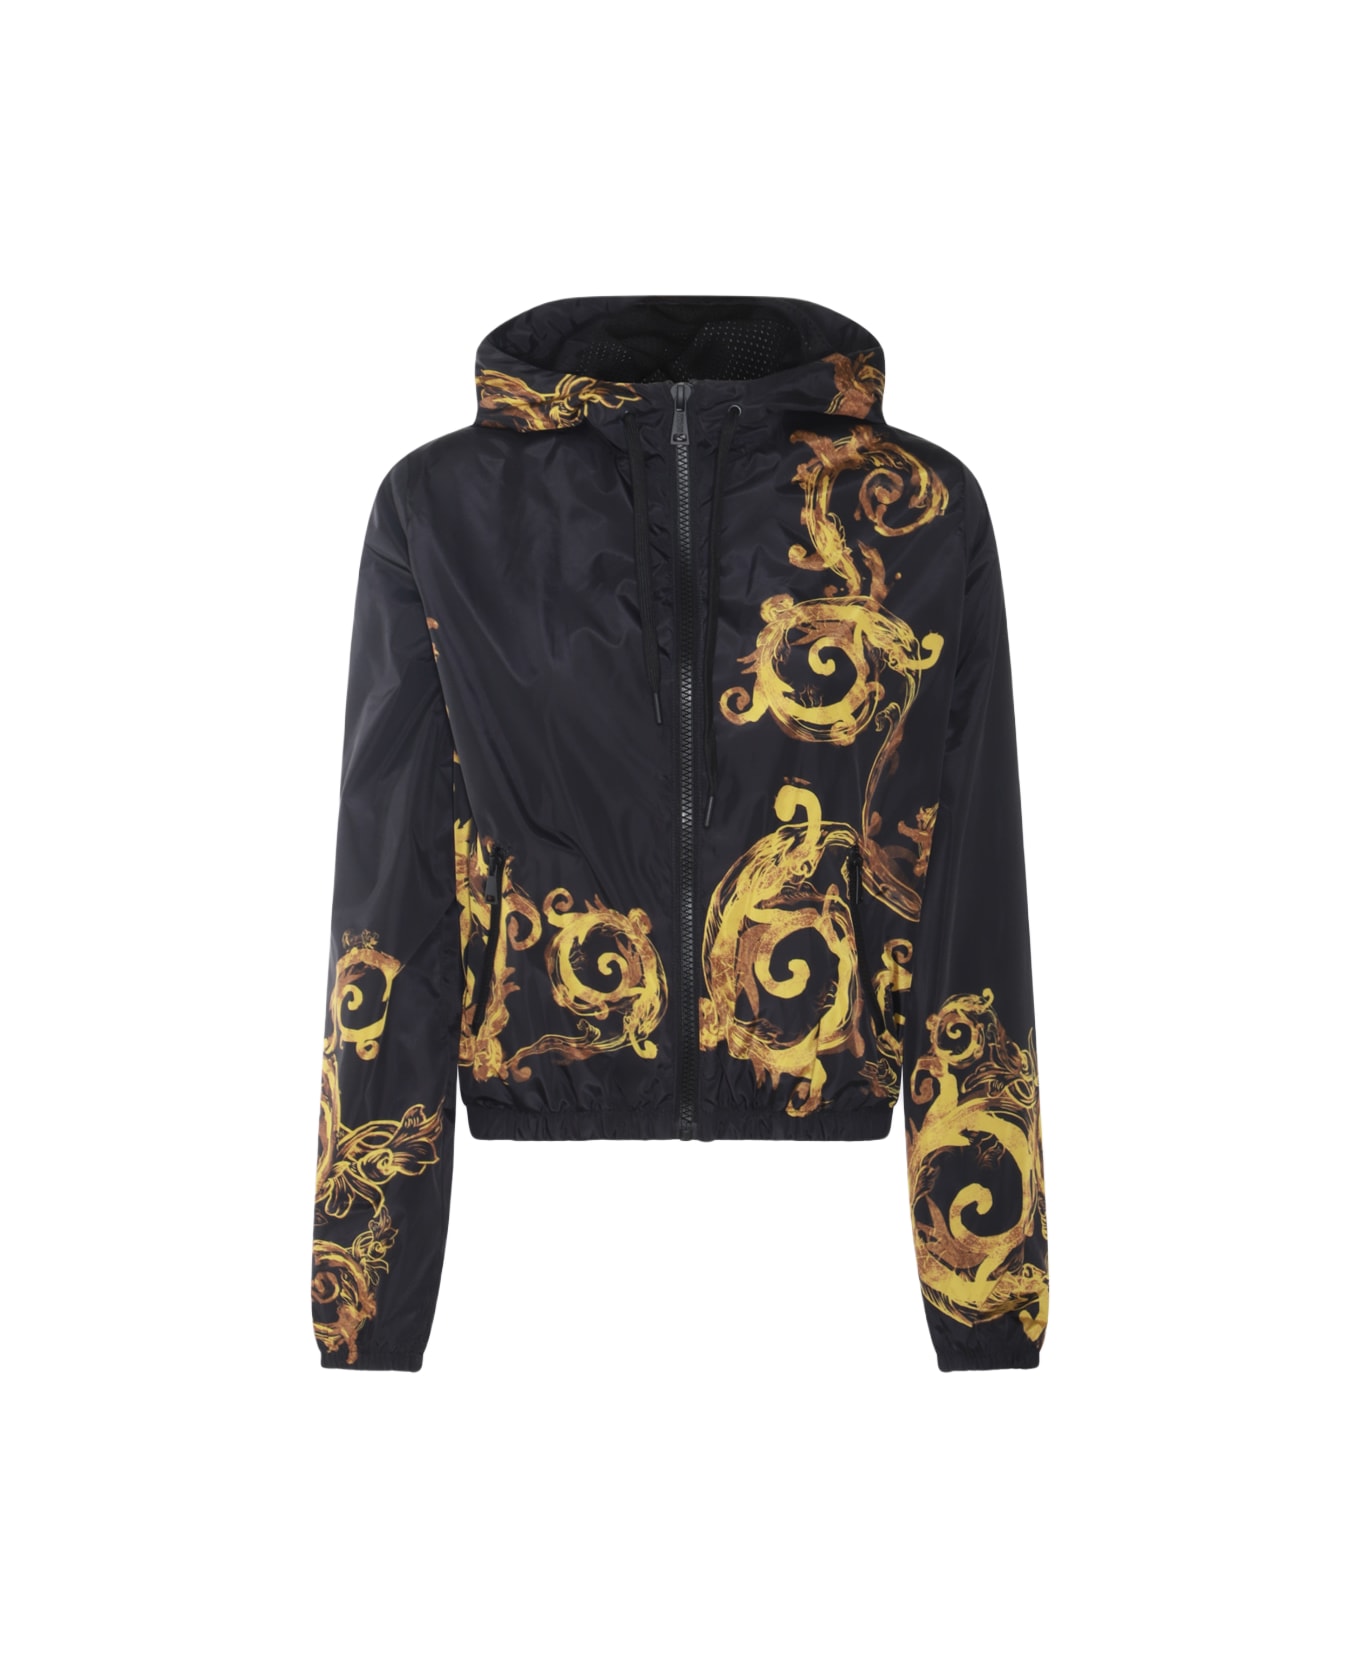 Versace Jeans Couture Black And Gold Casual Jacket - Black